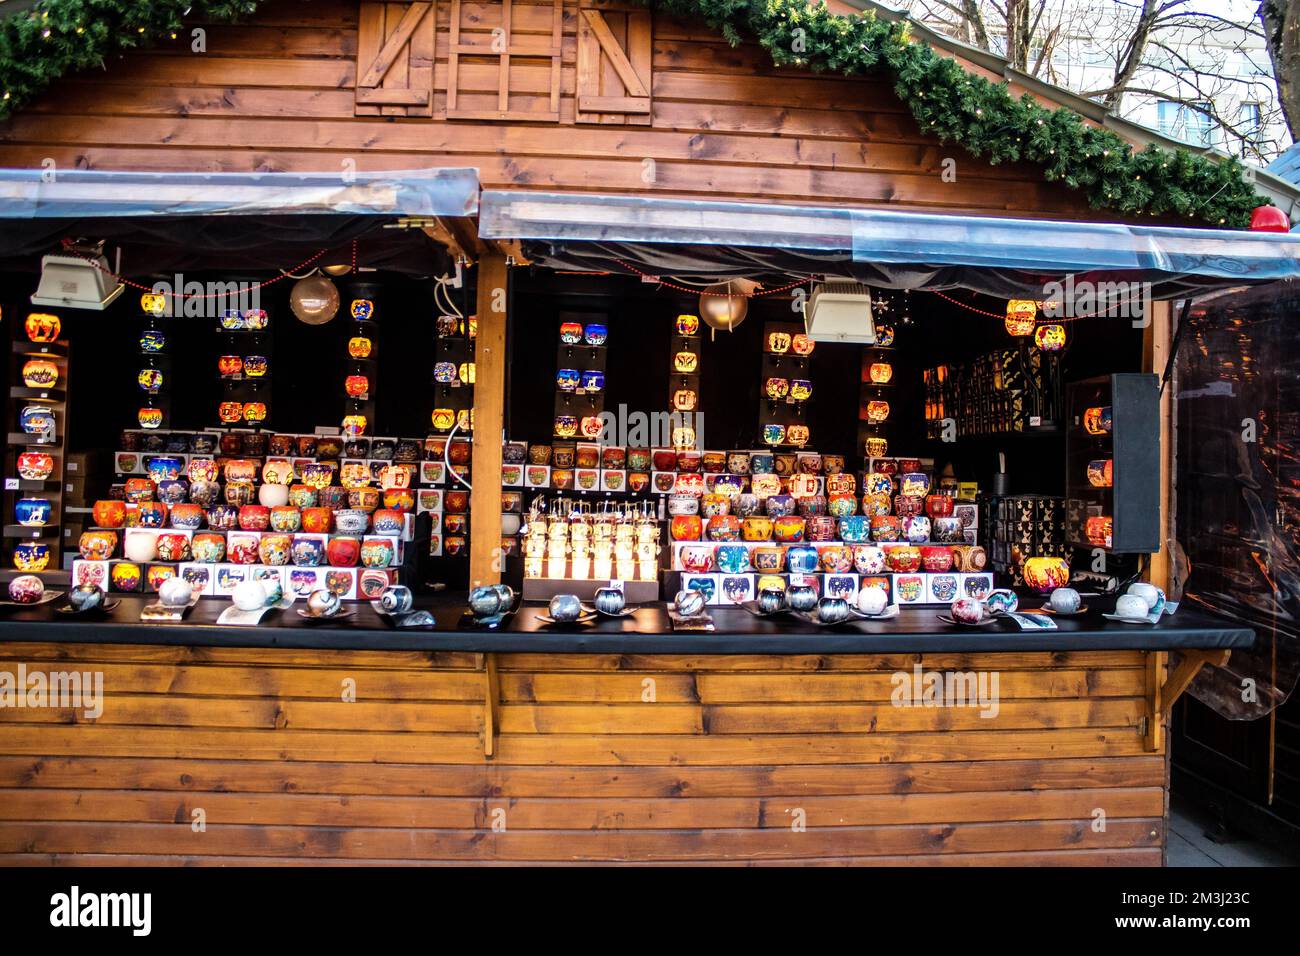 On the Promenades Jean-Louis Schneiter, the 150 chalets of the 'Christmas Village' will be deployed. Christmas Market in Reims will take place from De Stock Photo